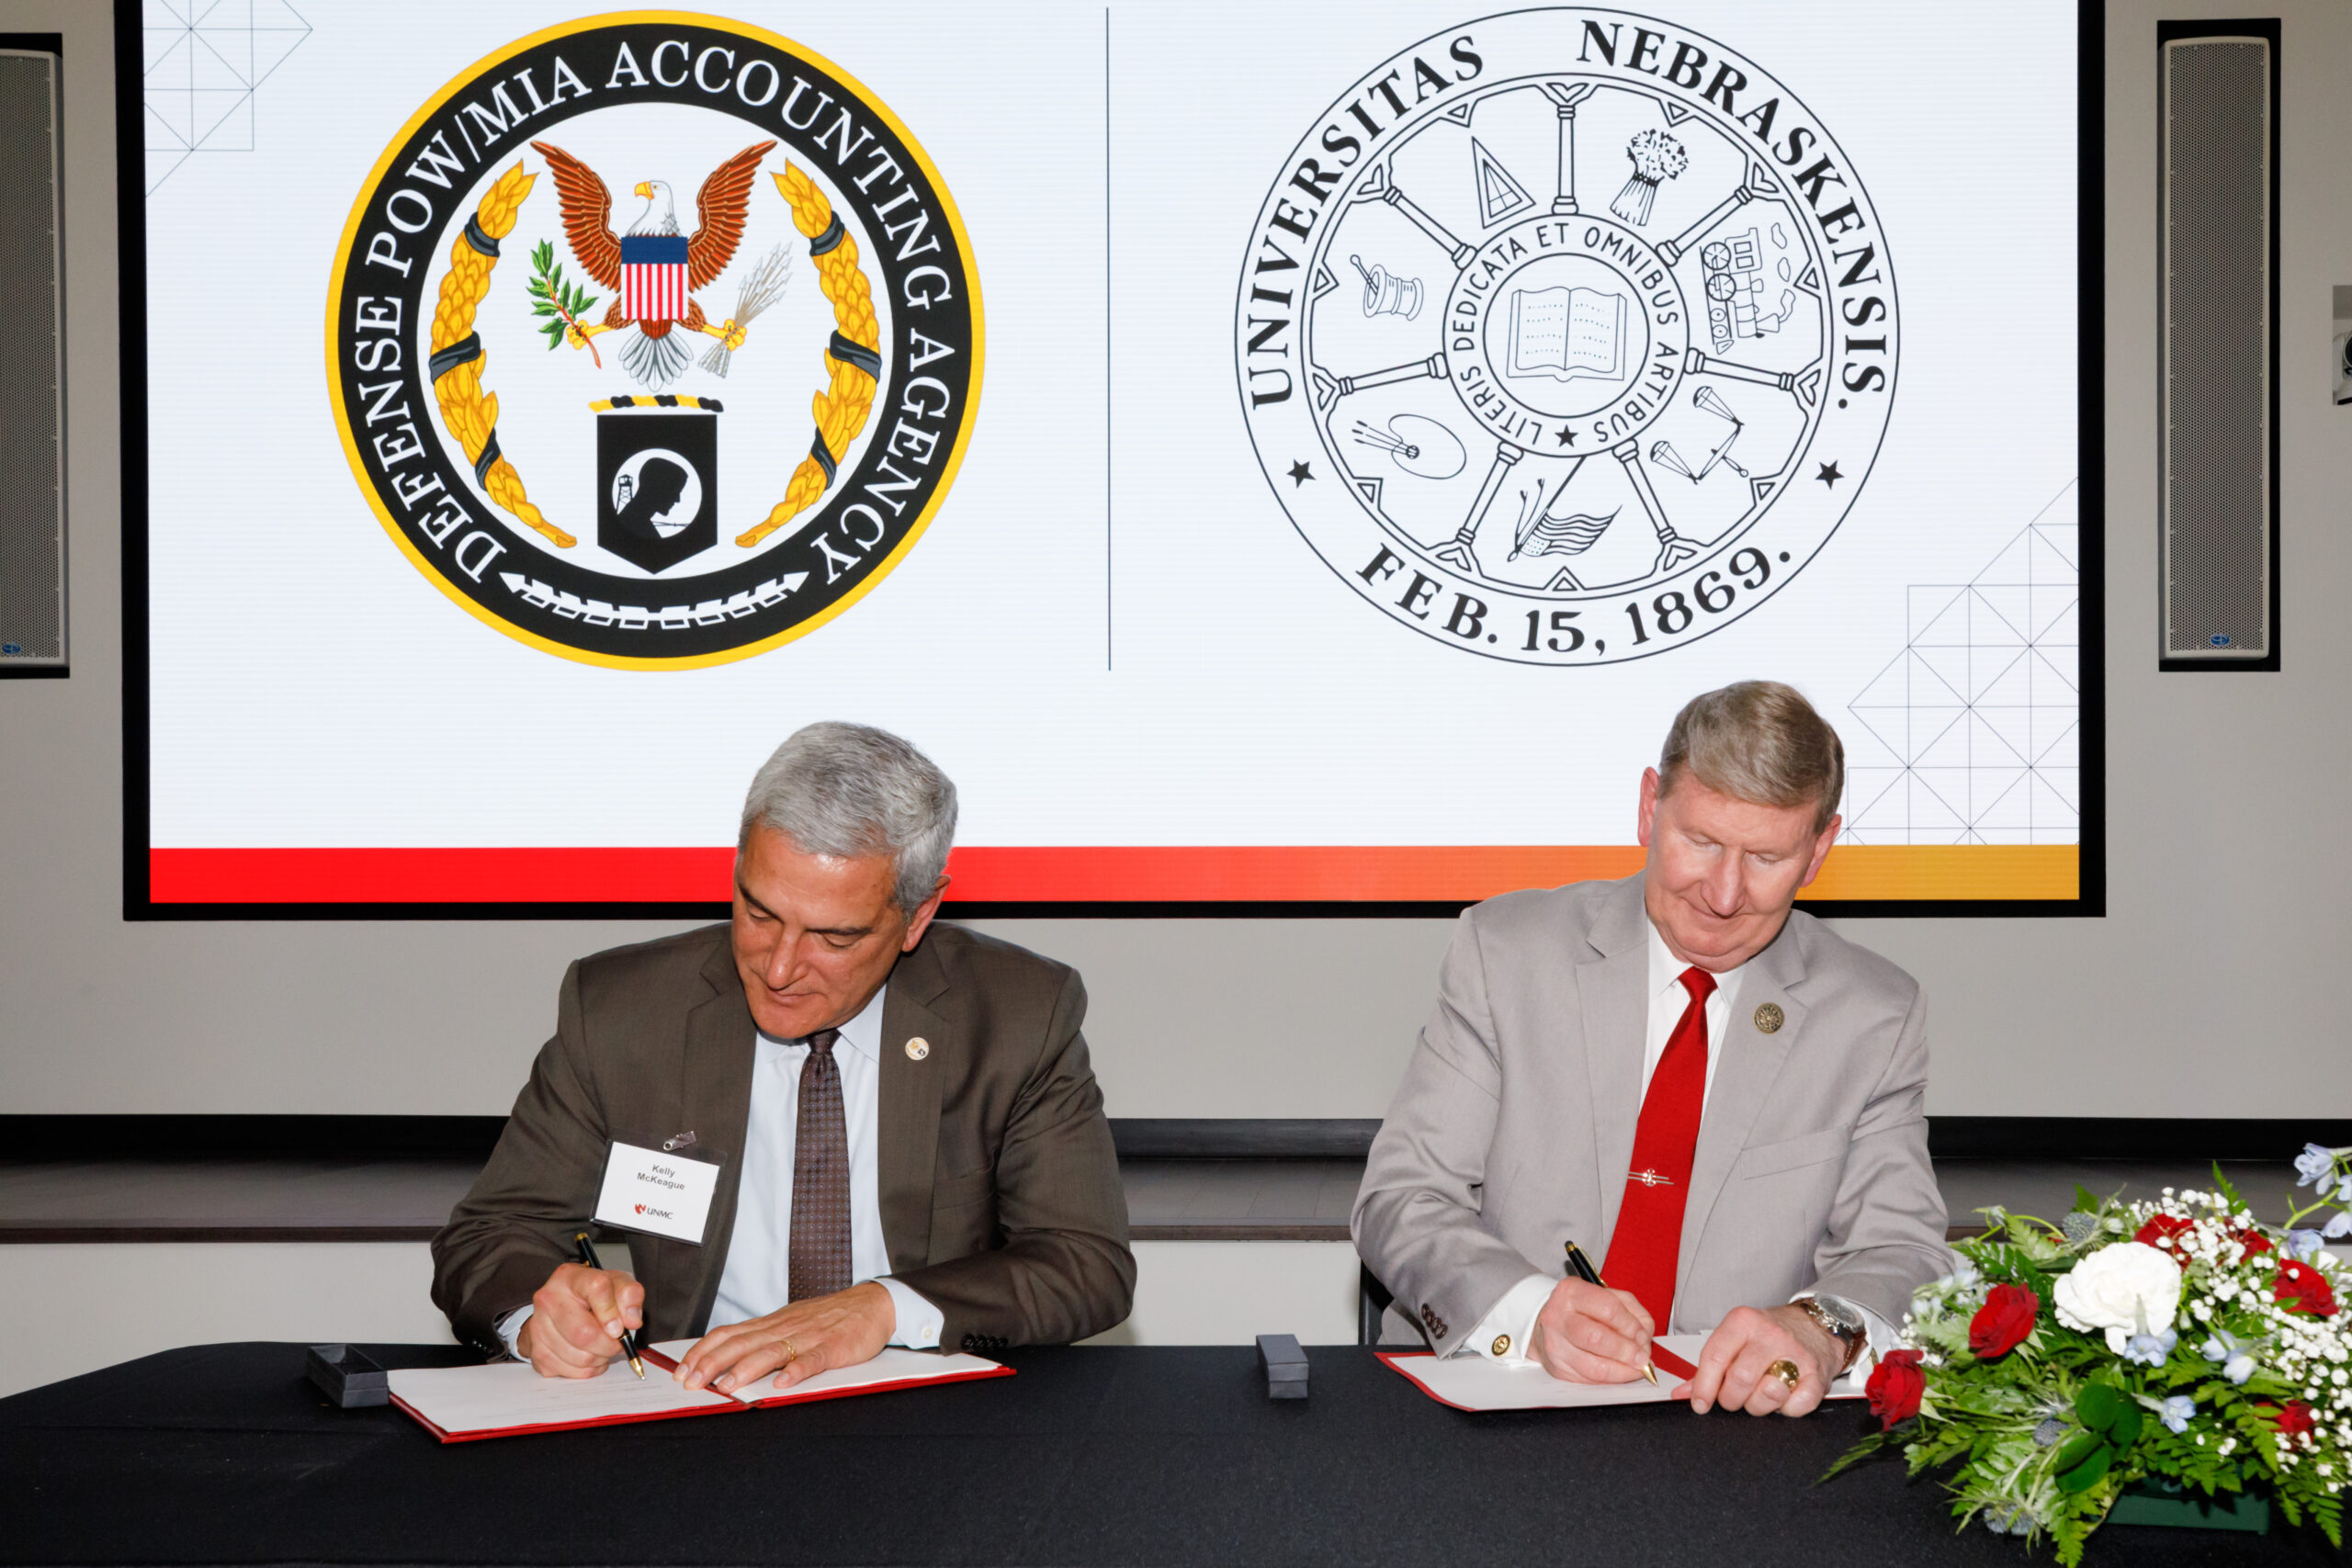 University of Nebraska President Ted Carter&comma; right&comma; and Defense POW&sol;MIA Accounting Agency Director Kelly McKeague sign a memorandum of understanding expanding collaborations between the two institutions&period;